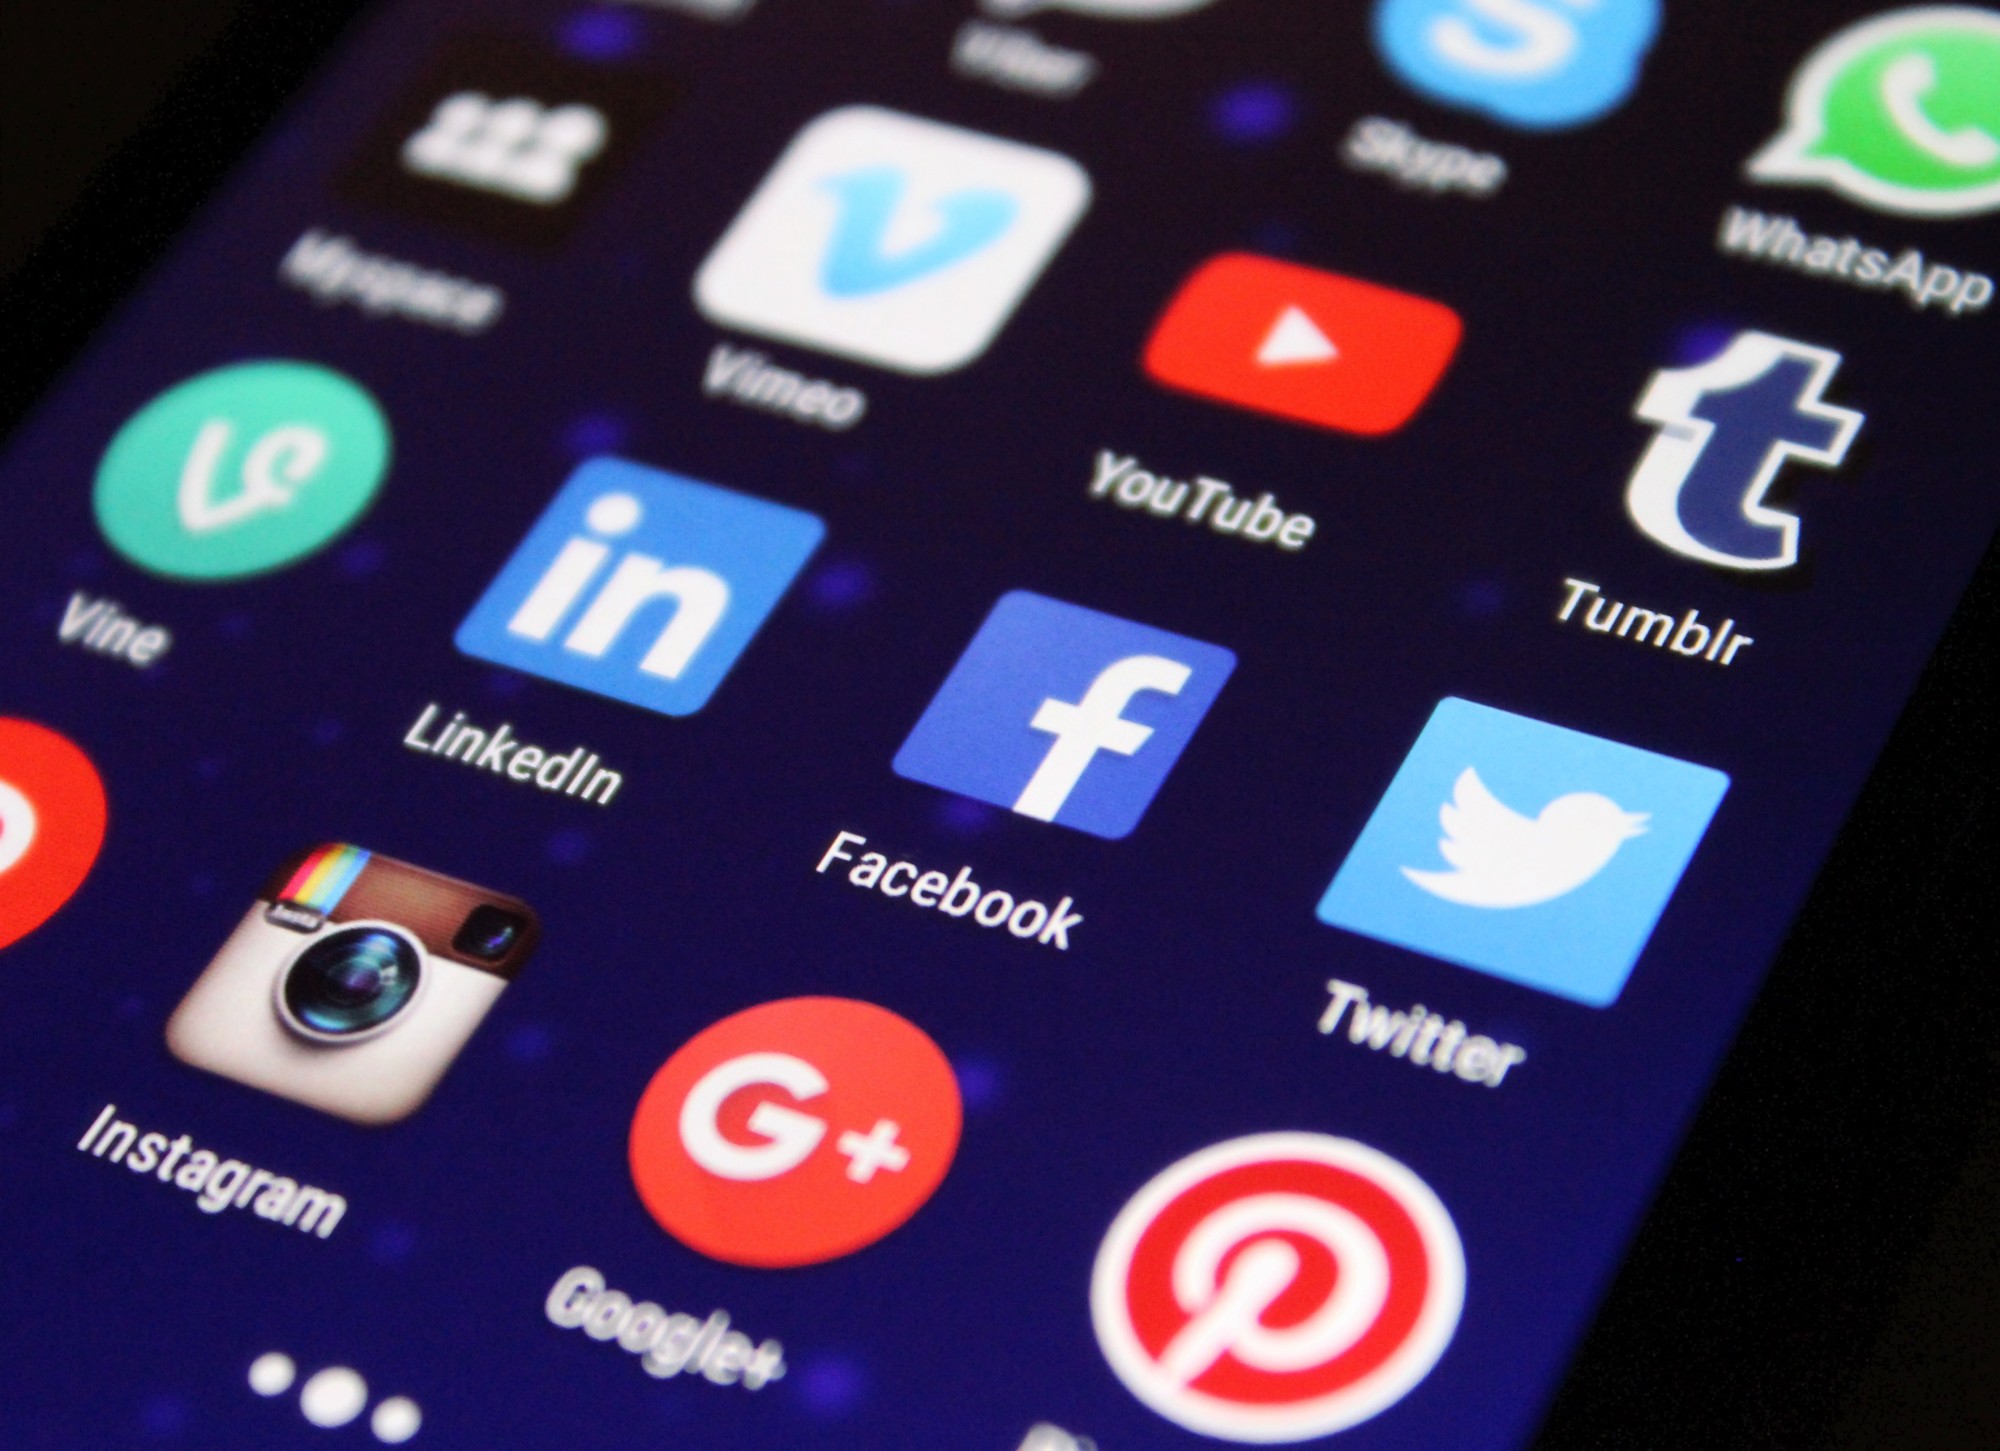 3 Innovative Ways to Use Social Media to Gain Exposure for Your Moving Business